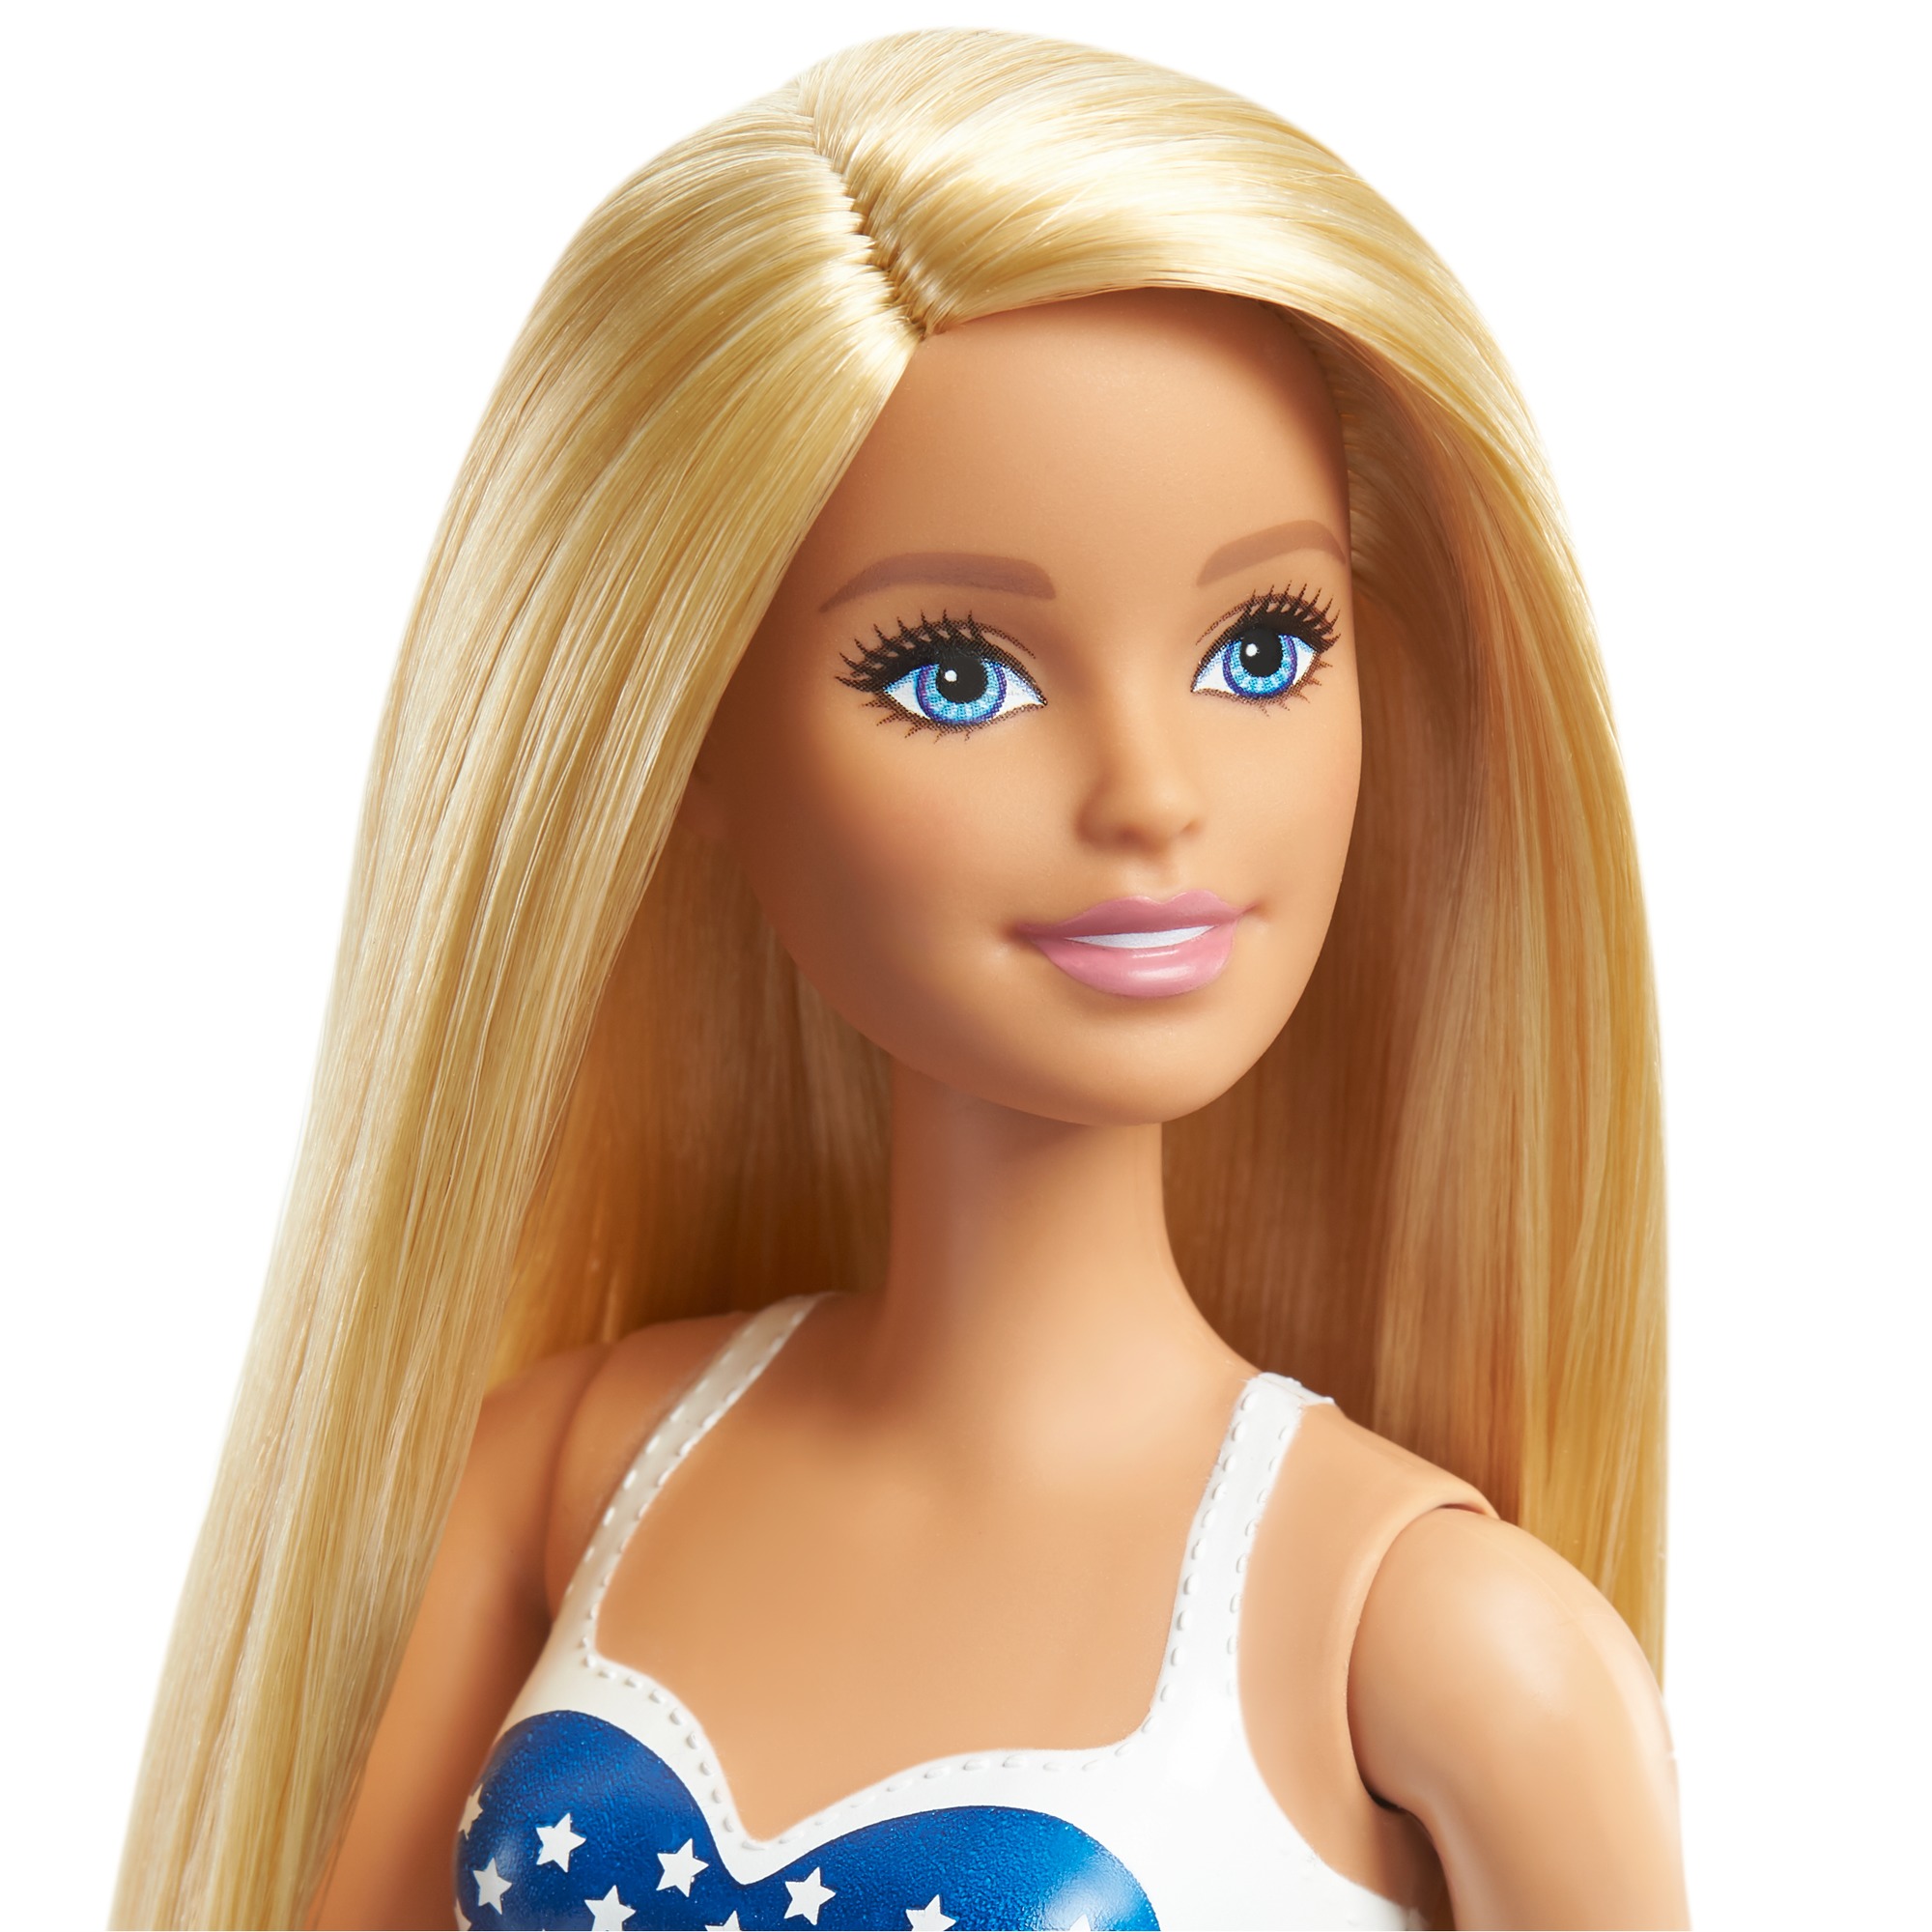 Barbie Swimsuit Beach Doll with Blonde Hair & American Flag Suit - image 3 of 5